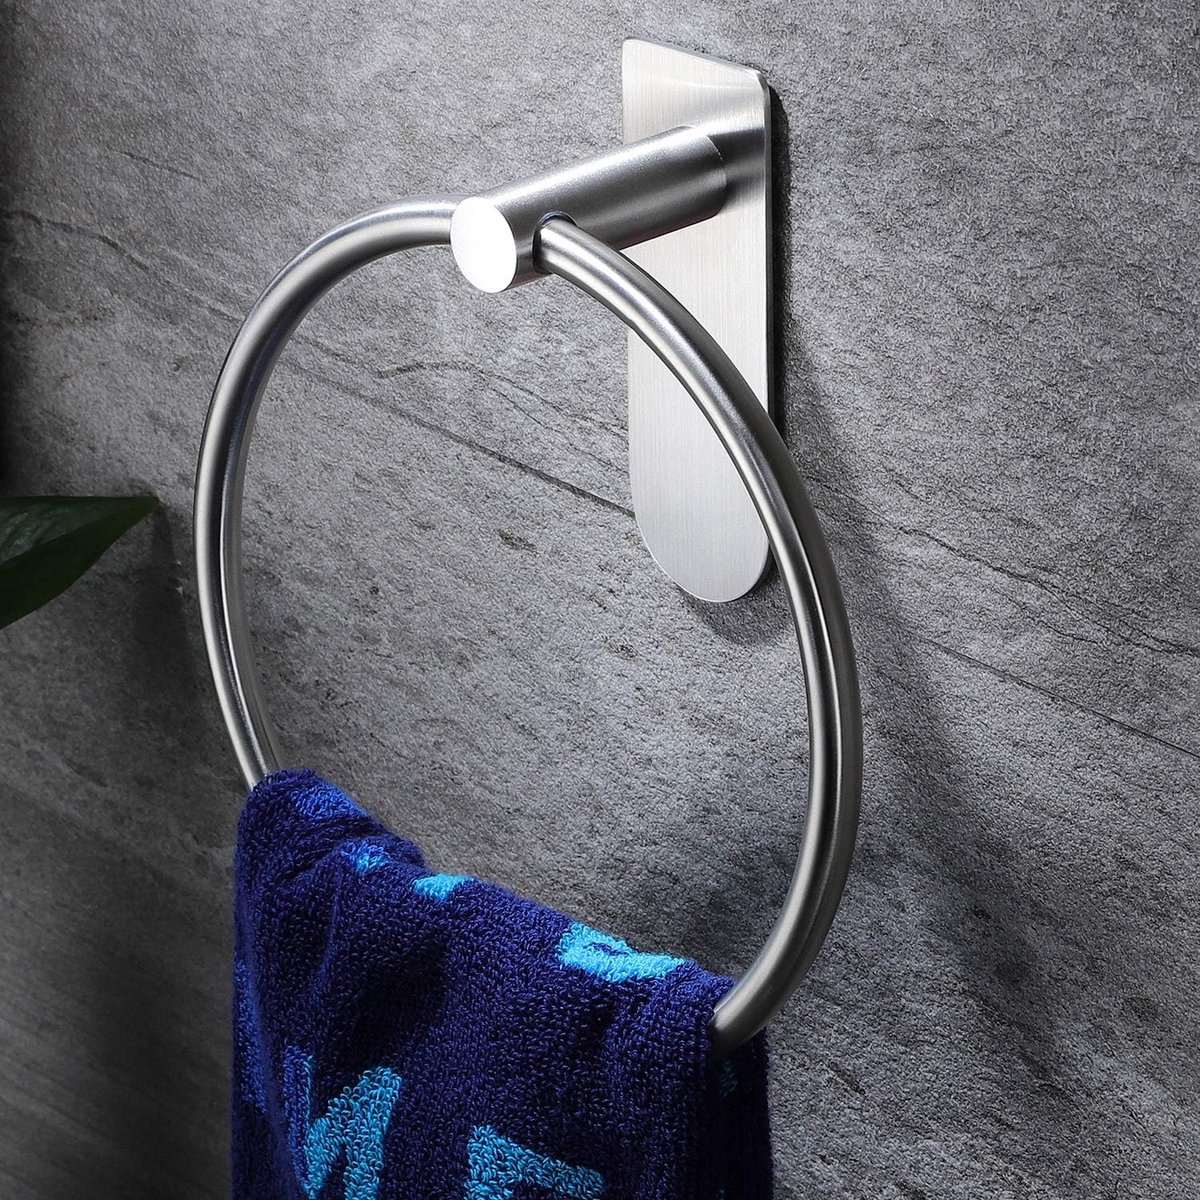 Towel Ring Towel Holder No Drilling Required Towel Rail Wall Self-Adhesive Stainless Steel for Kitchen and Bathroom